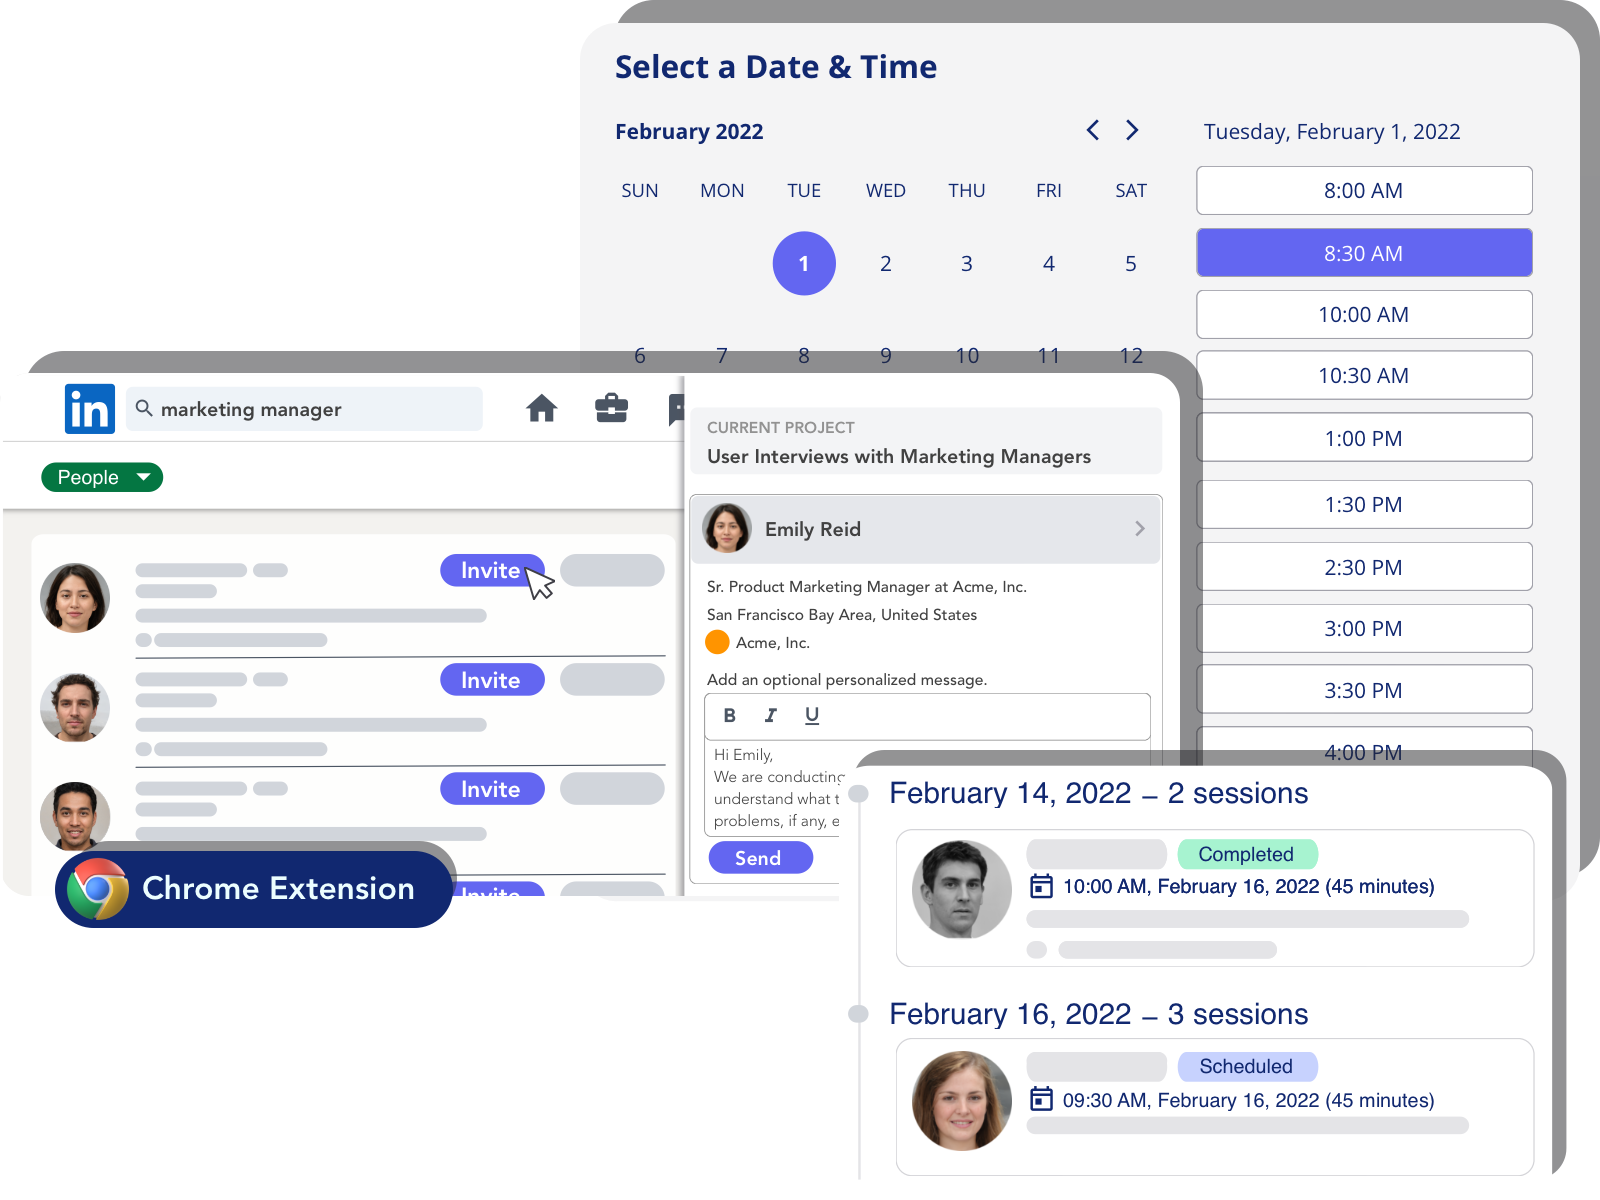 OpenQ helps Product teams do more user research in less time by automating tedious recruiting & scheduling processes to 10x research throughput.